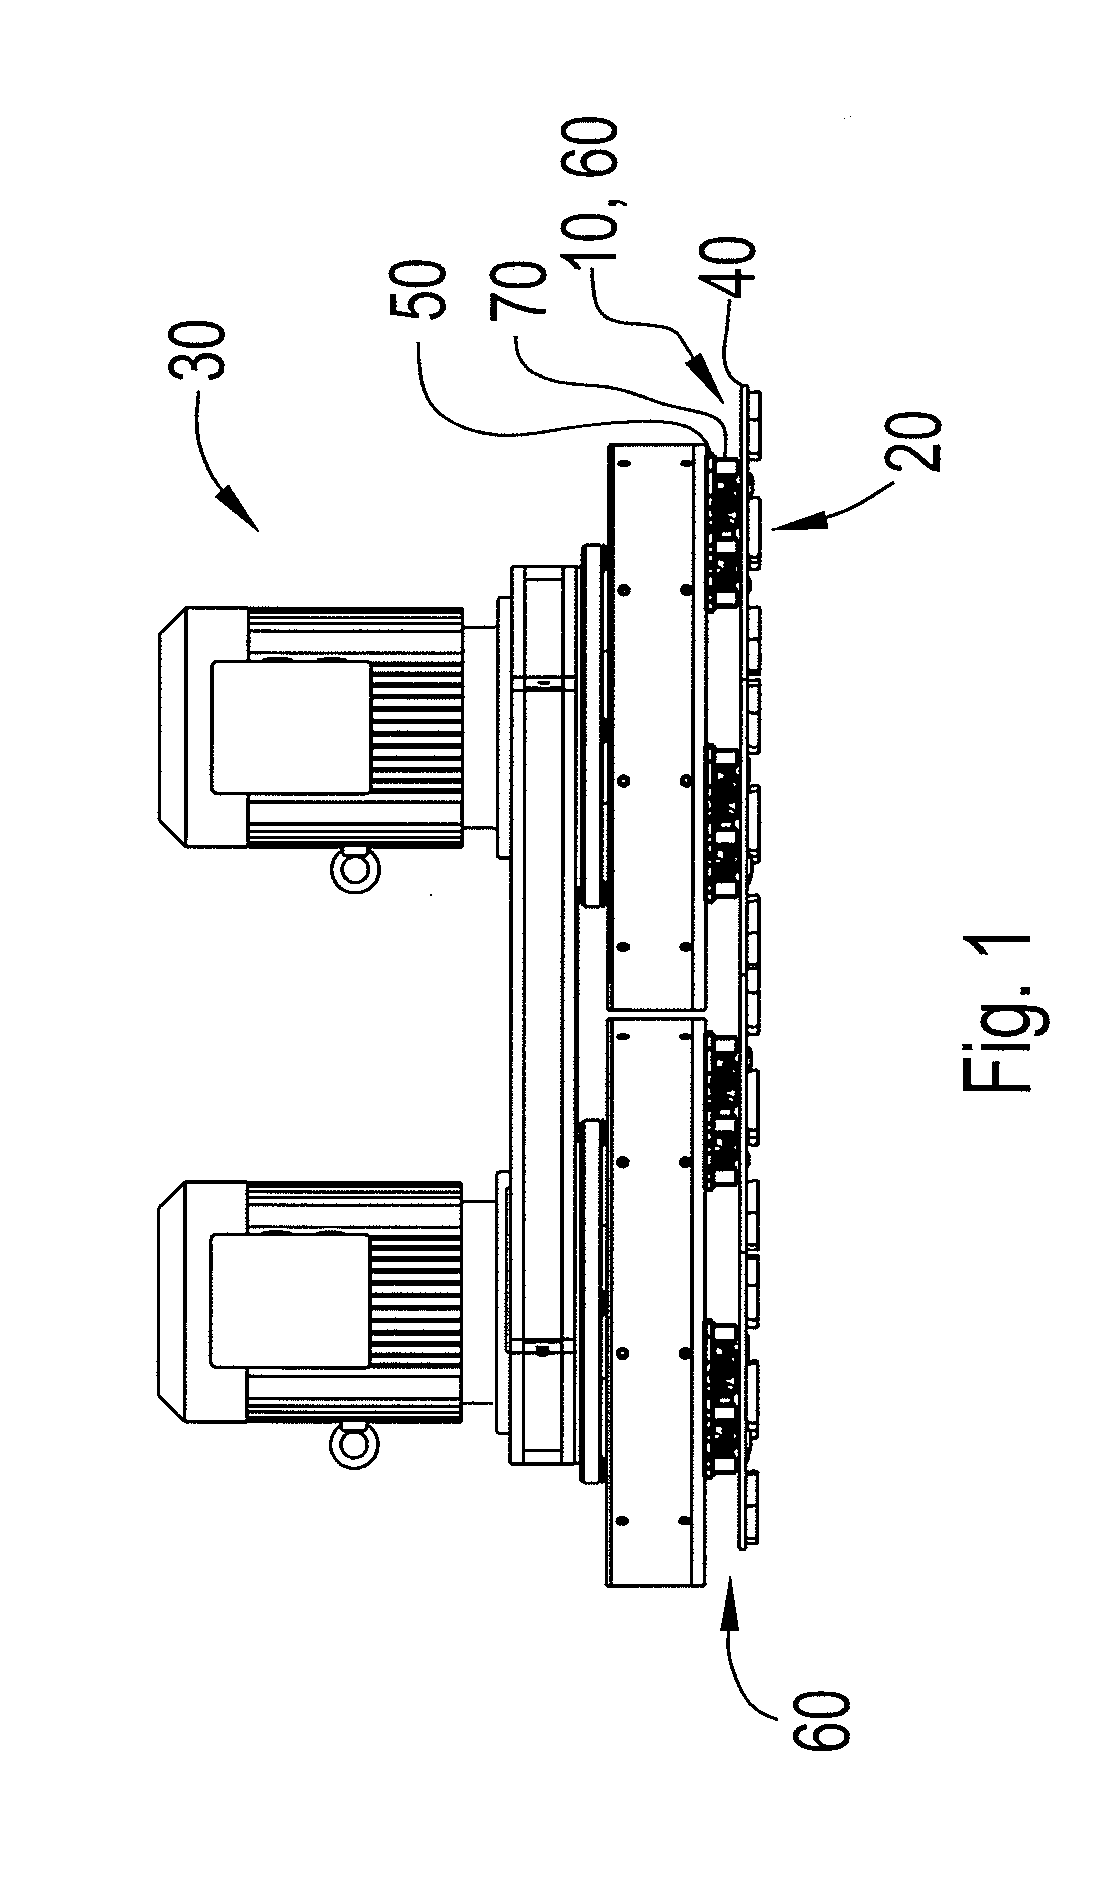 Grinding holder in a machining device